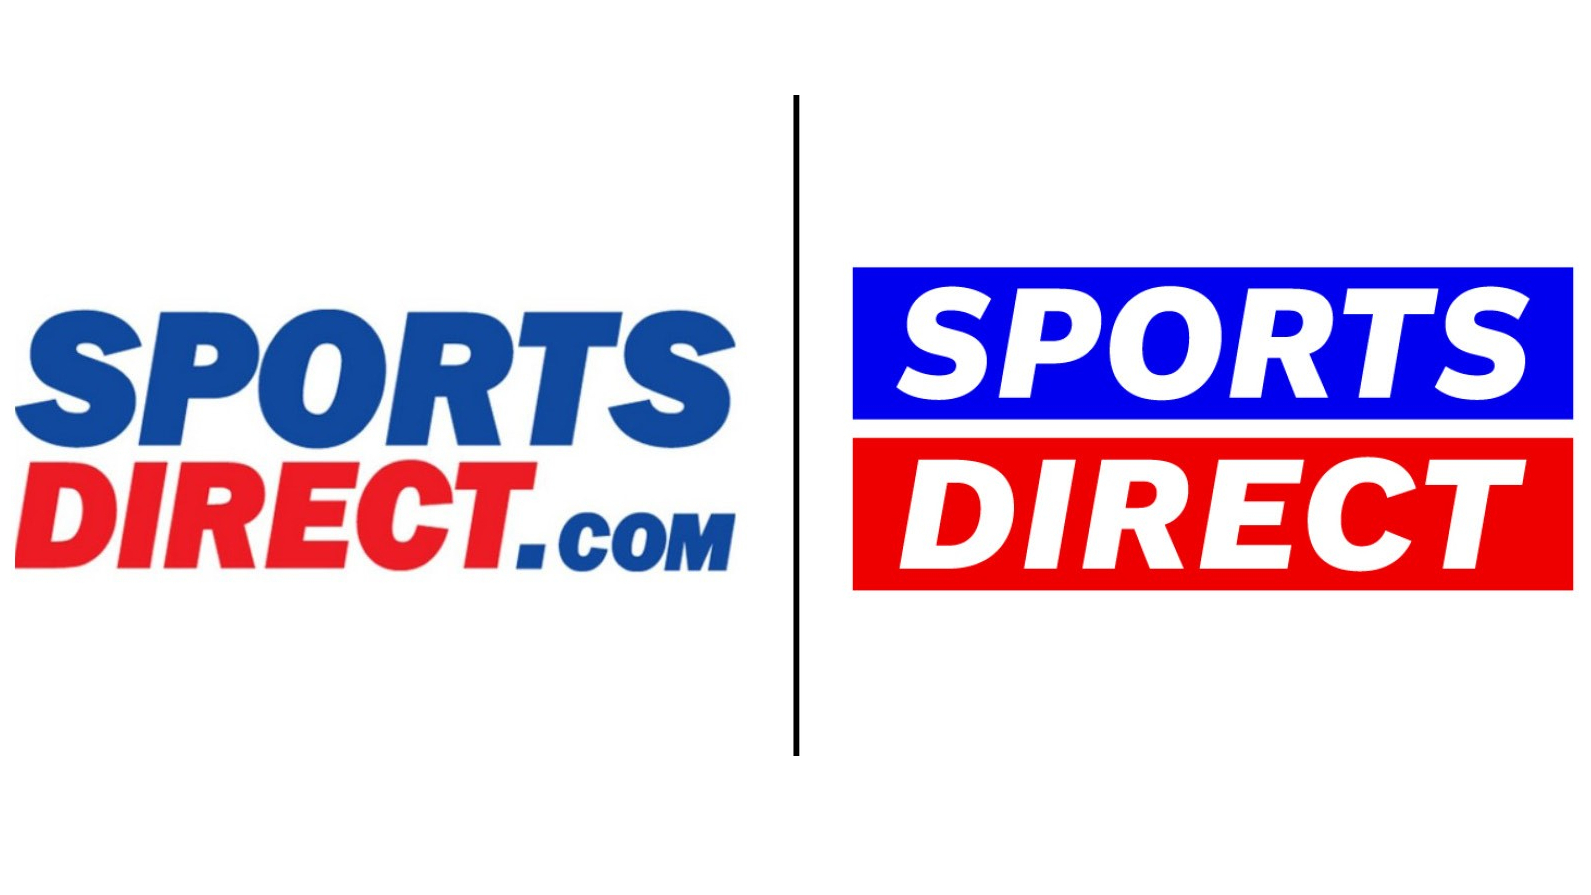 Sport Direct&#39;s new logo aims for equality | Creative Bloq